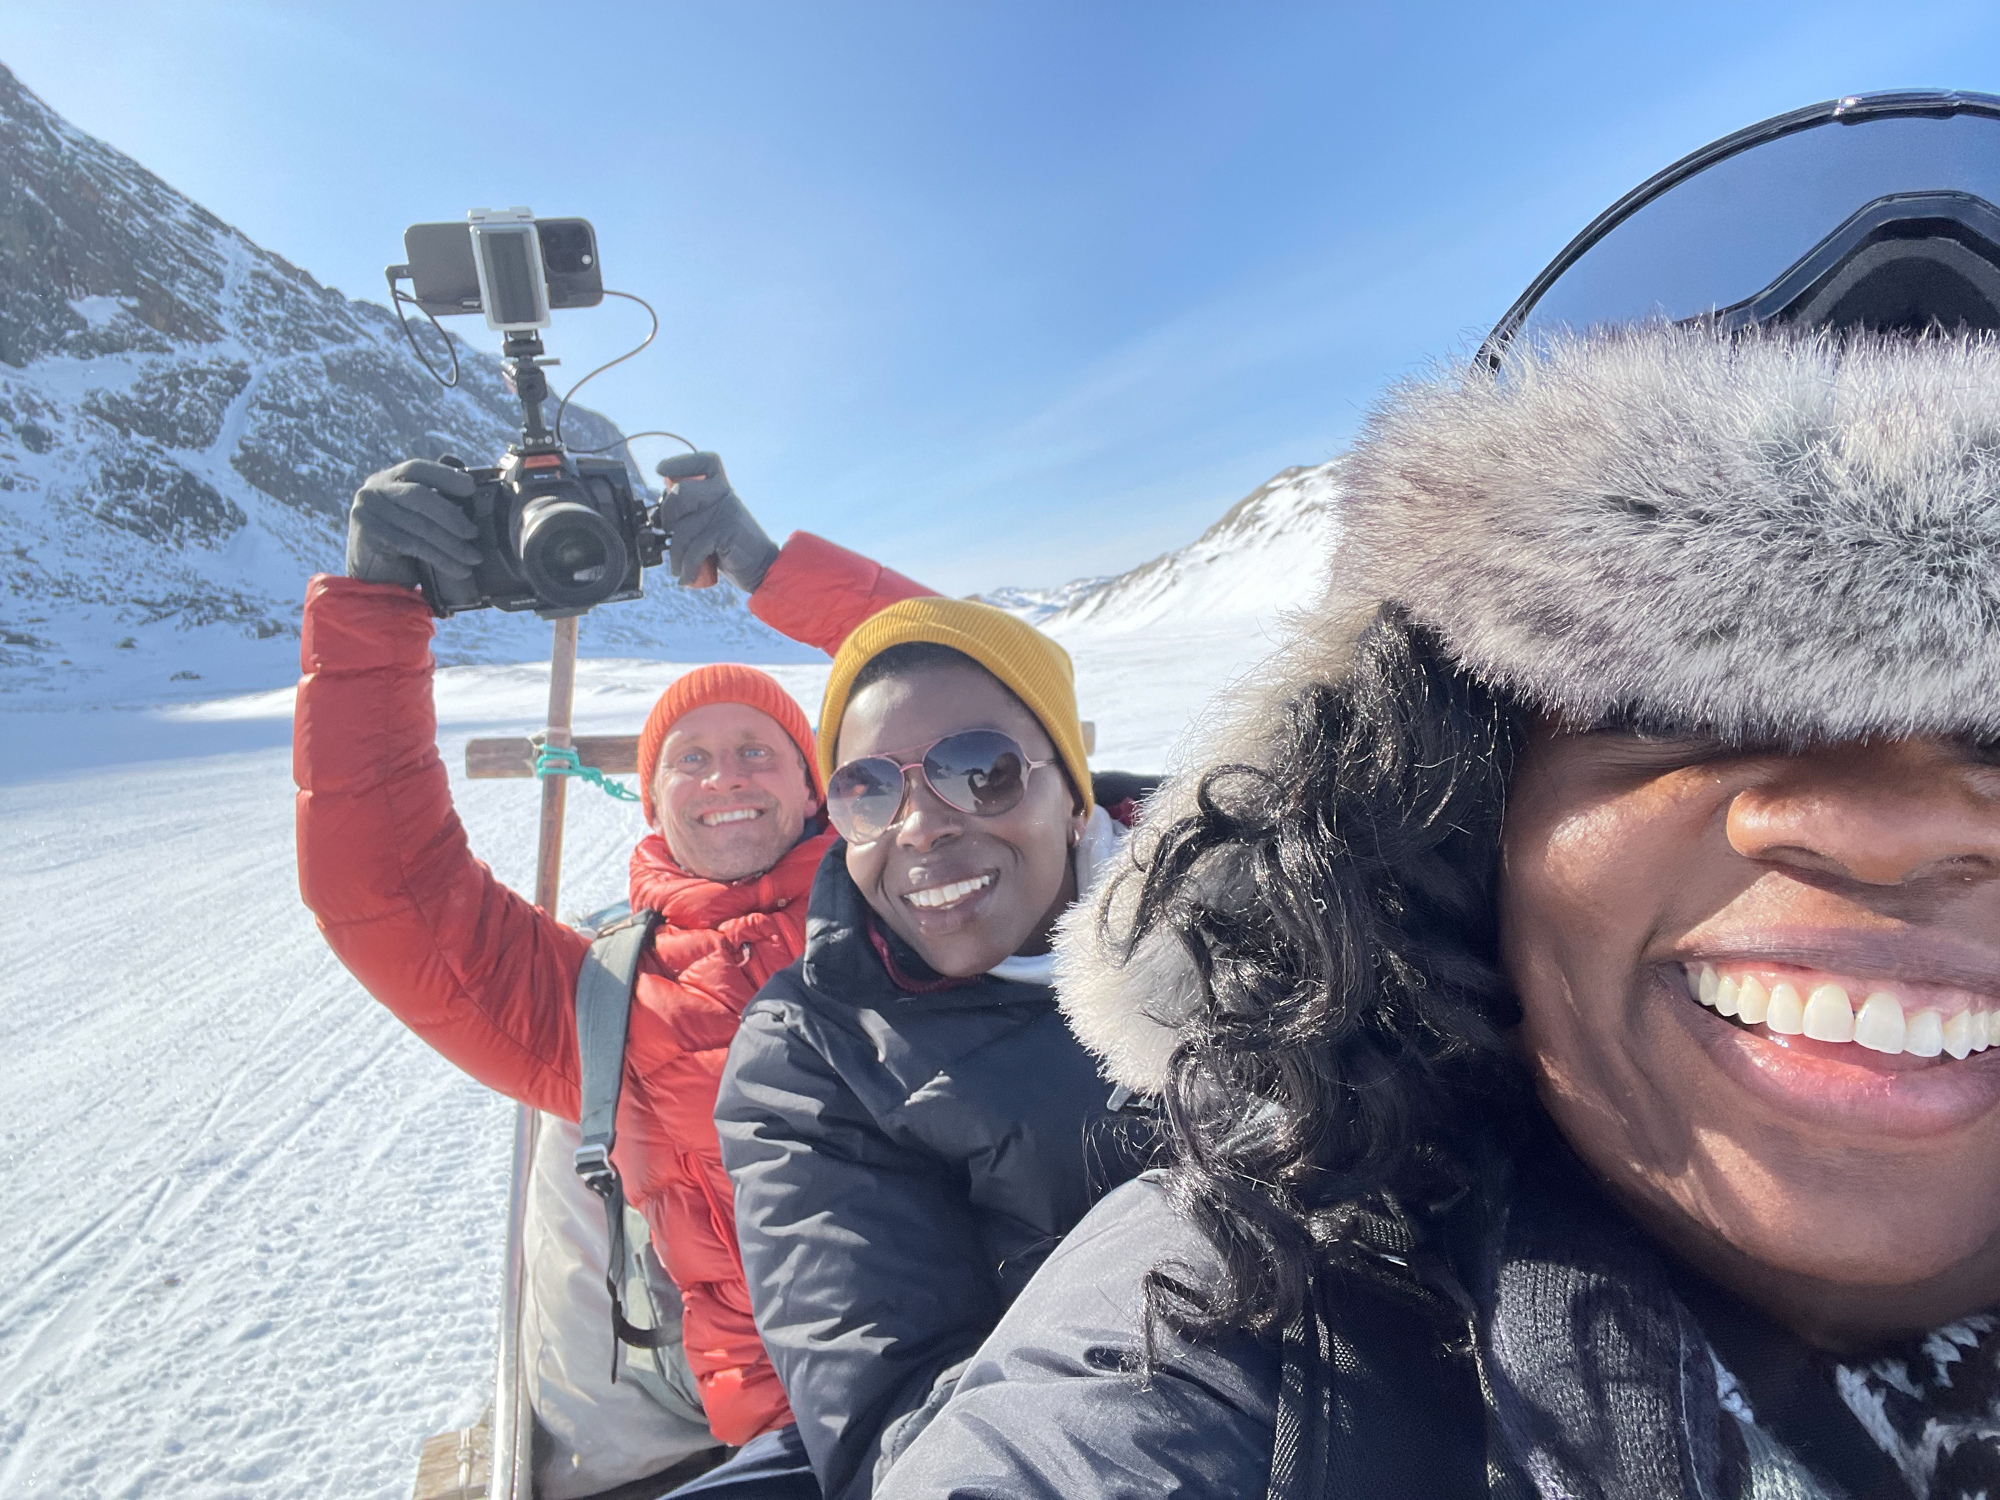 Three smiling people — two women and one man, on the back of a sled in a snowy landscape.